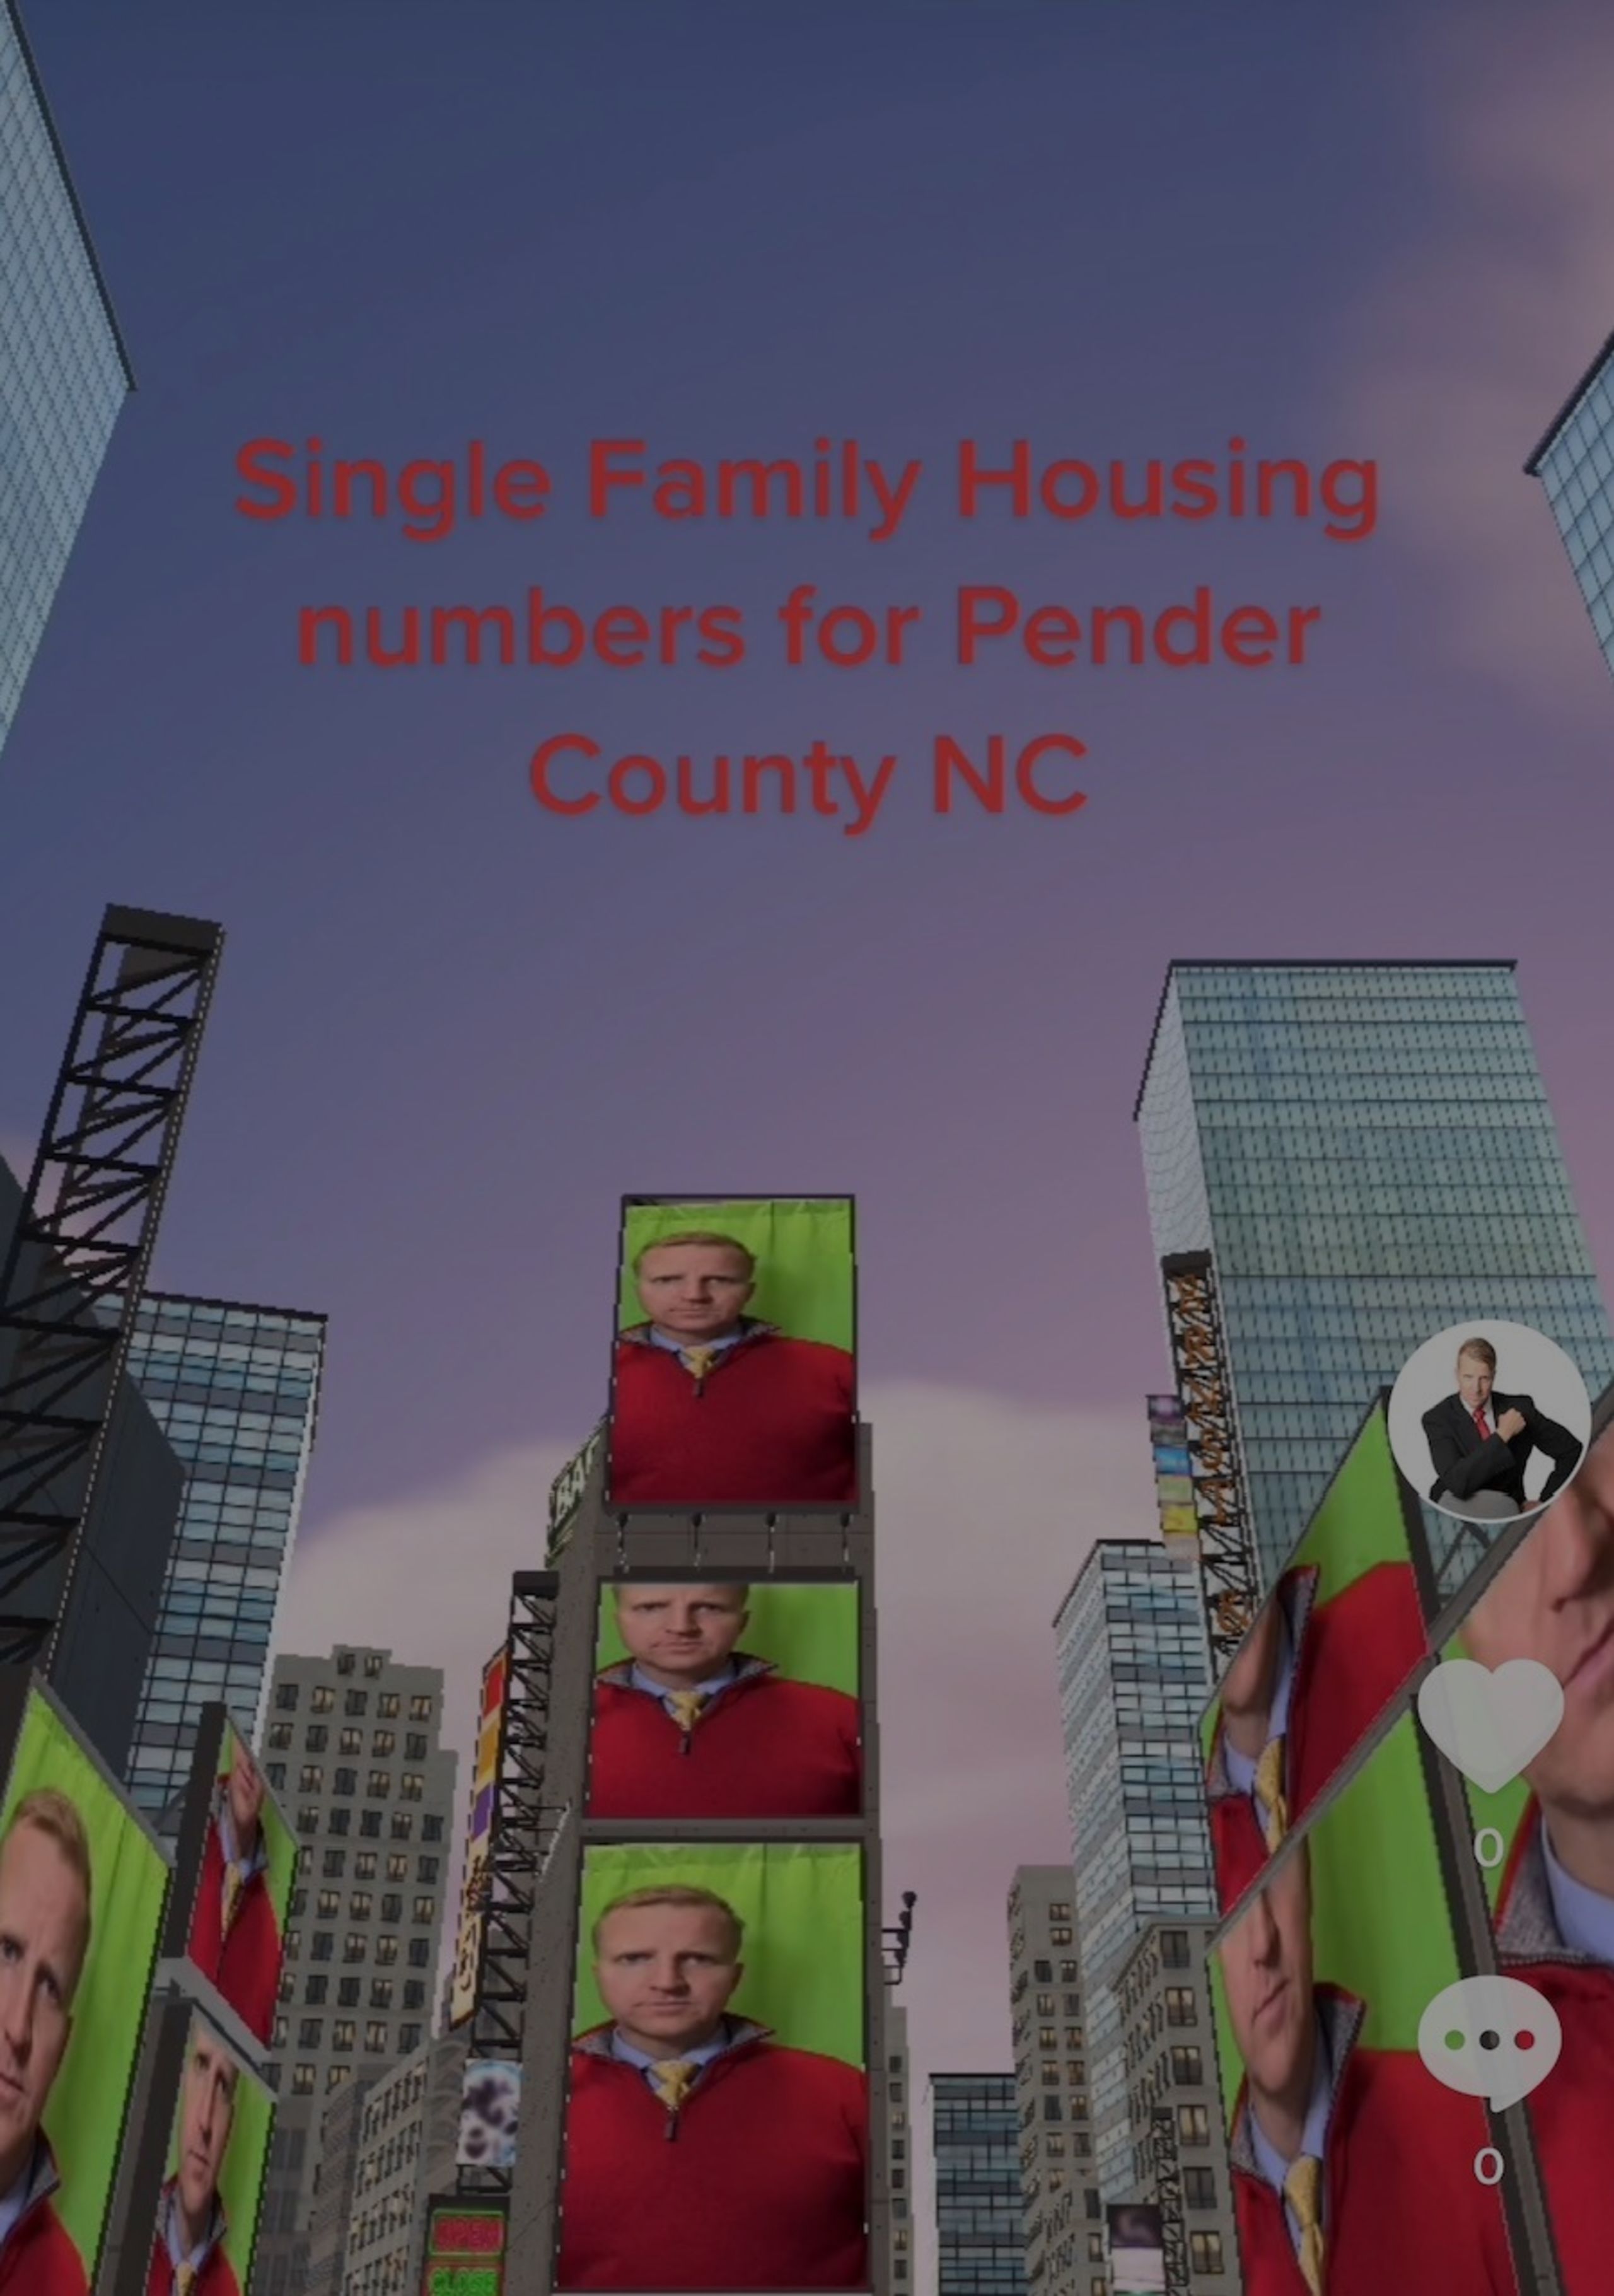 Single Family Housing Numbers for January 19, 2022